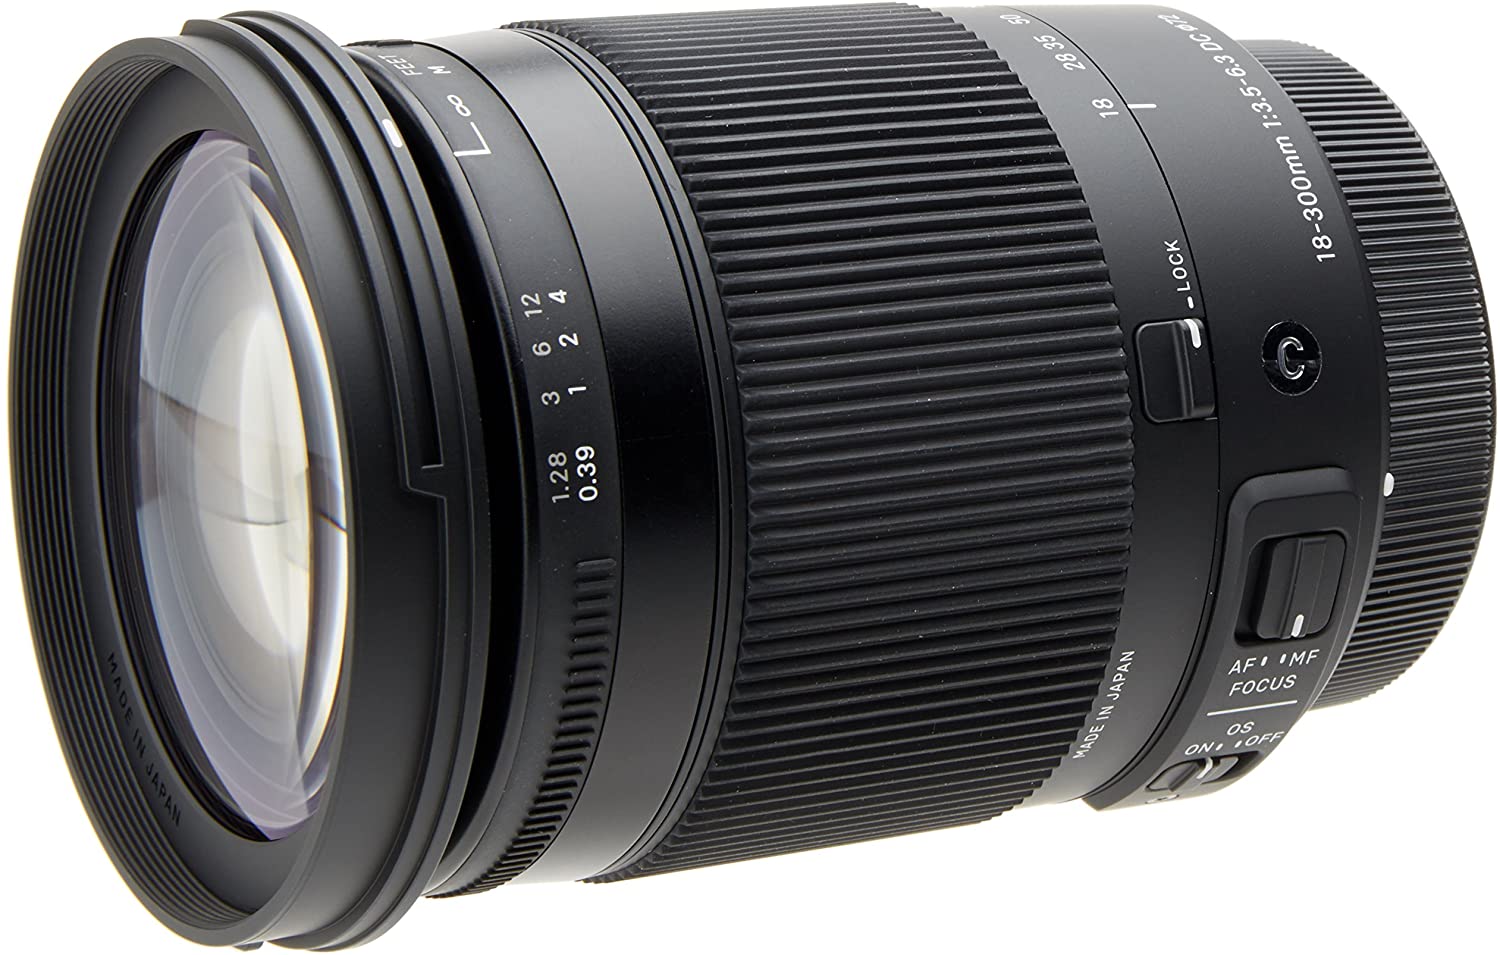 Best Canon Superzoom Lens for Travel Photography